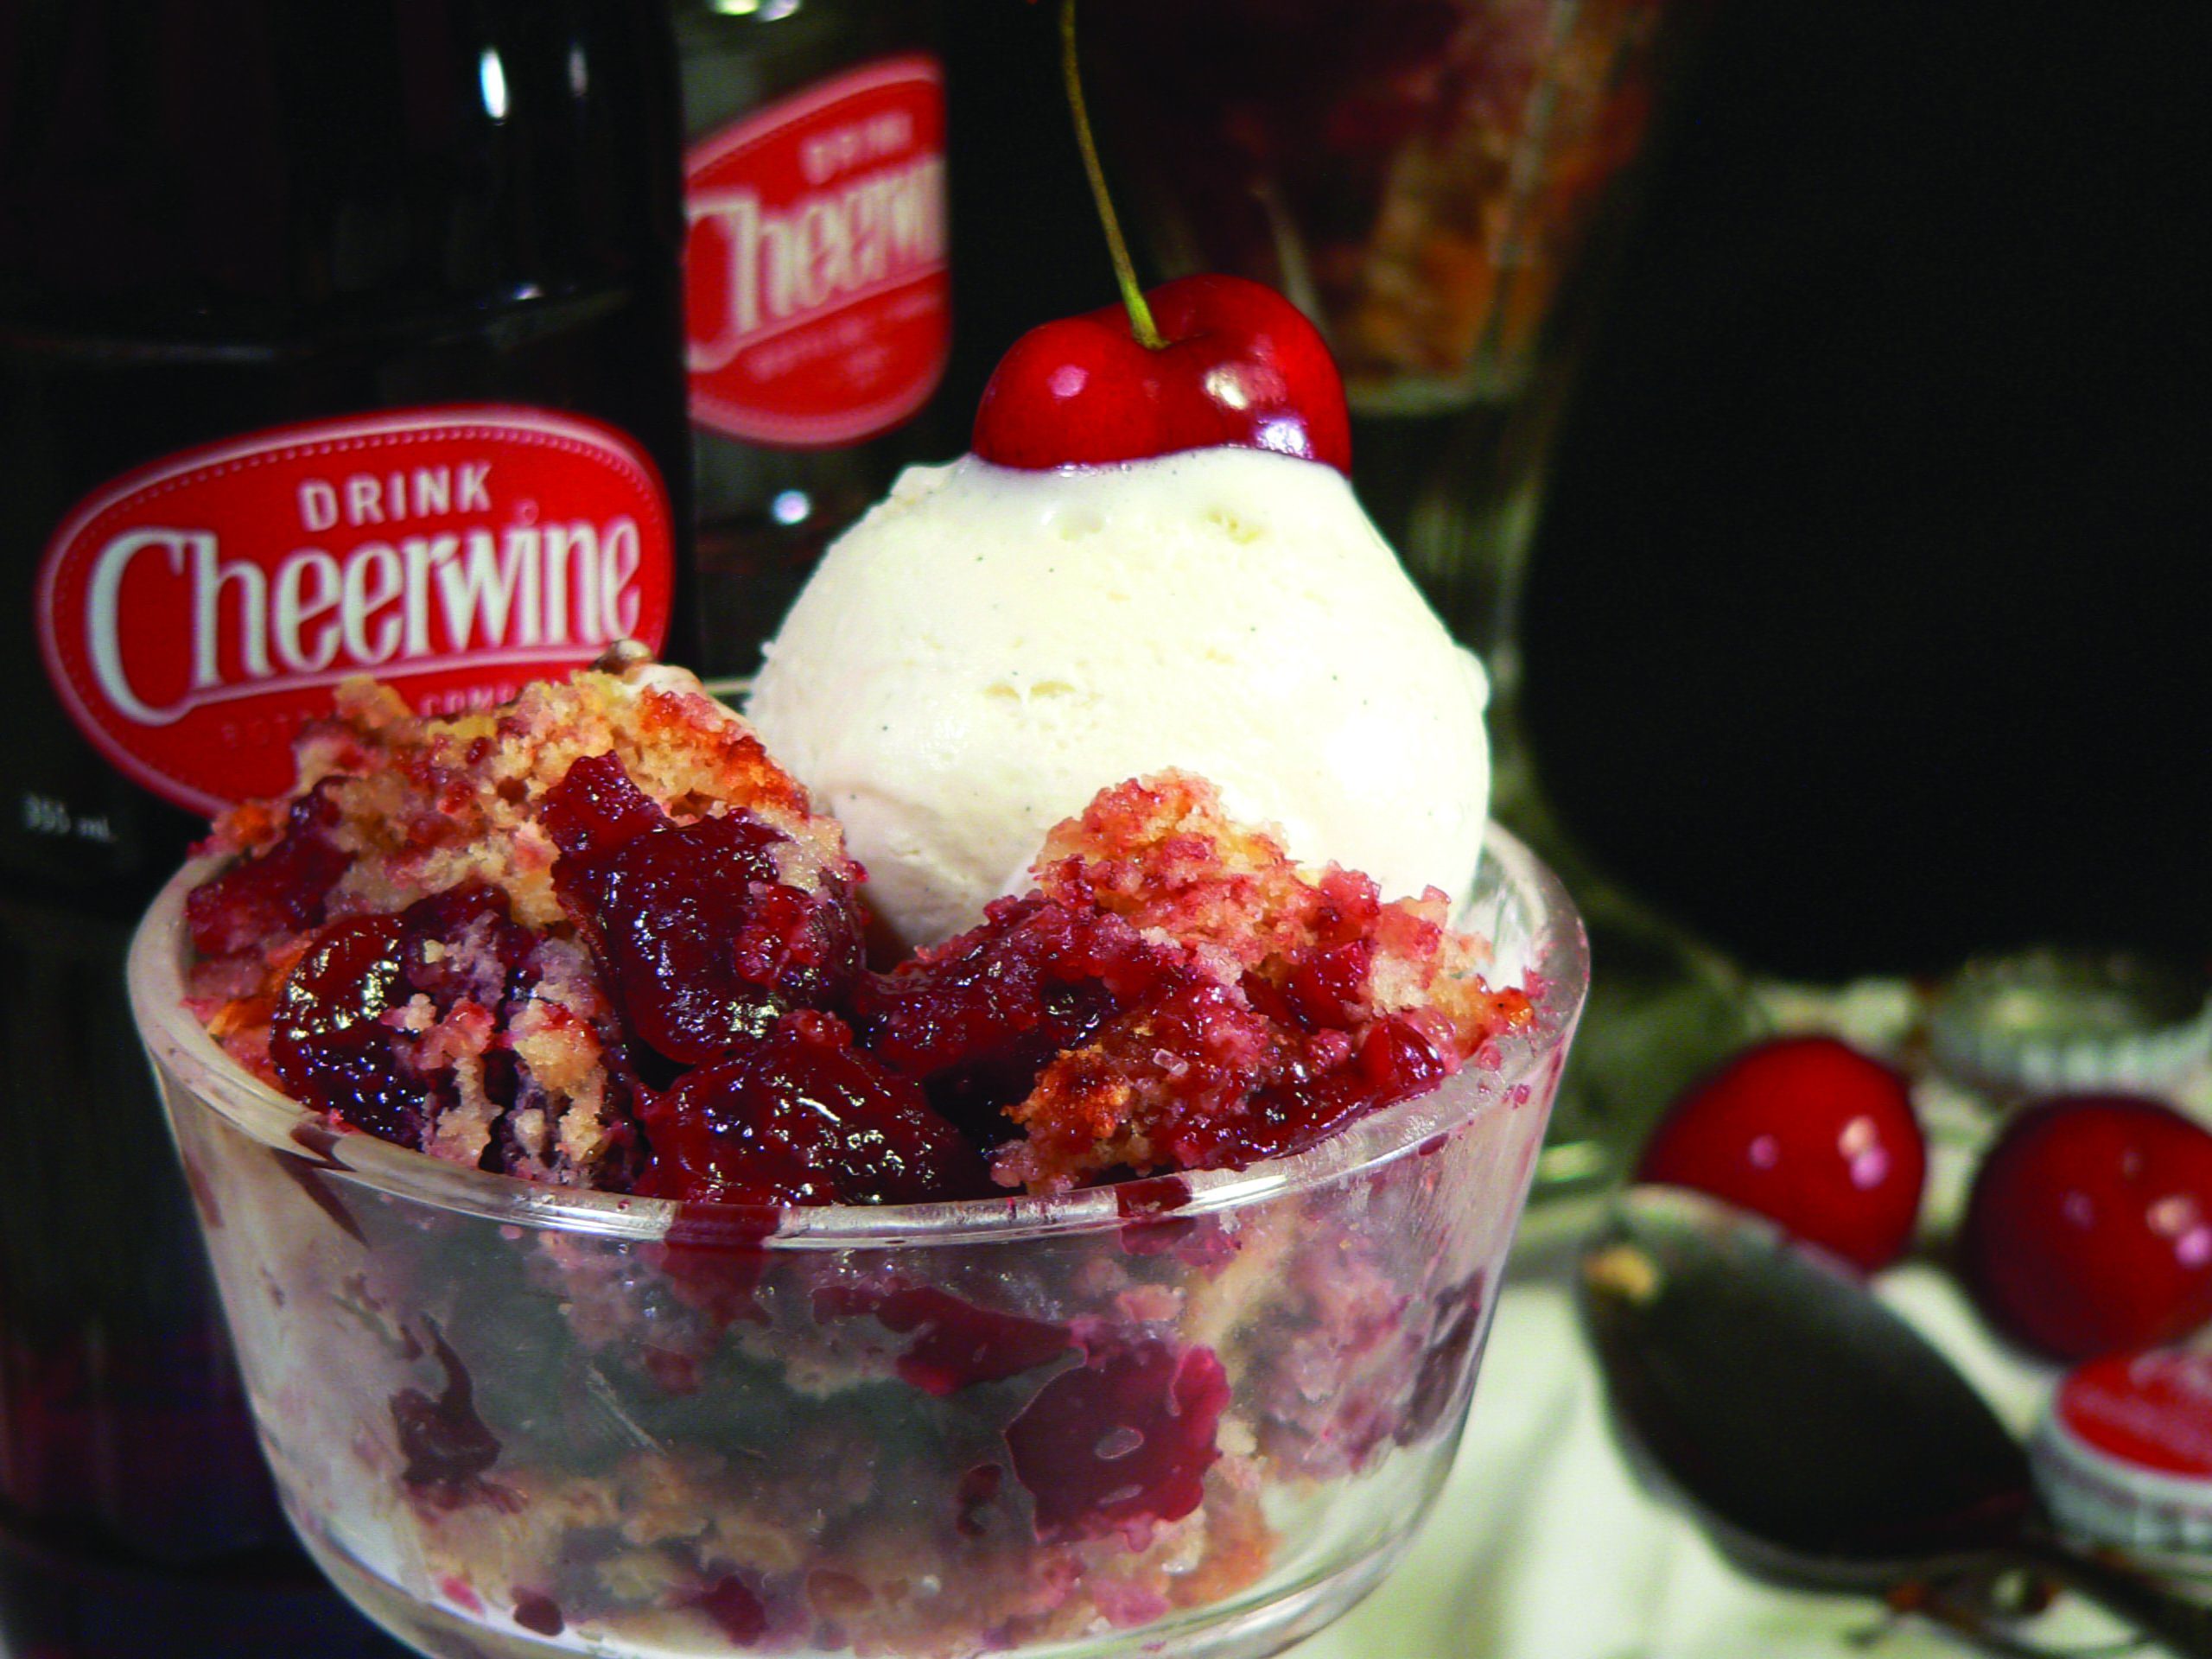 Cheerwine Cherry Cobbler is the perfect way to celebrate National Cherry CobblerDay on May 17 and also the 100th anniversary of Cheerwine.